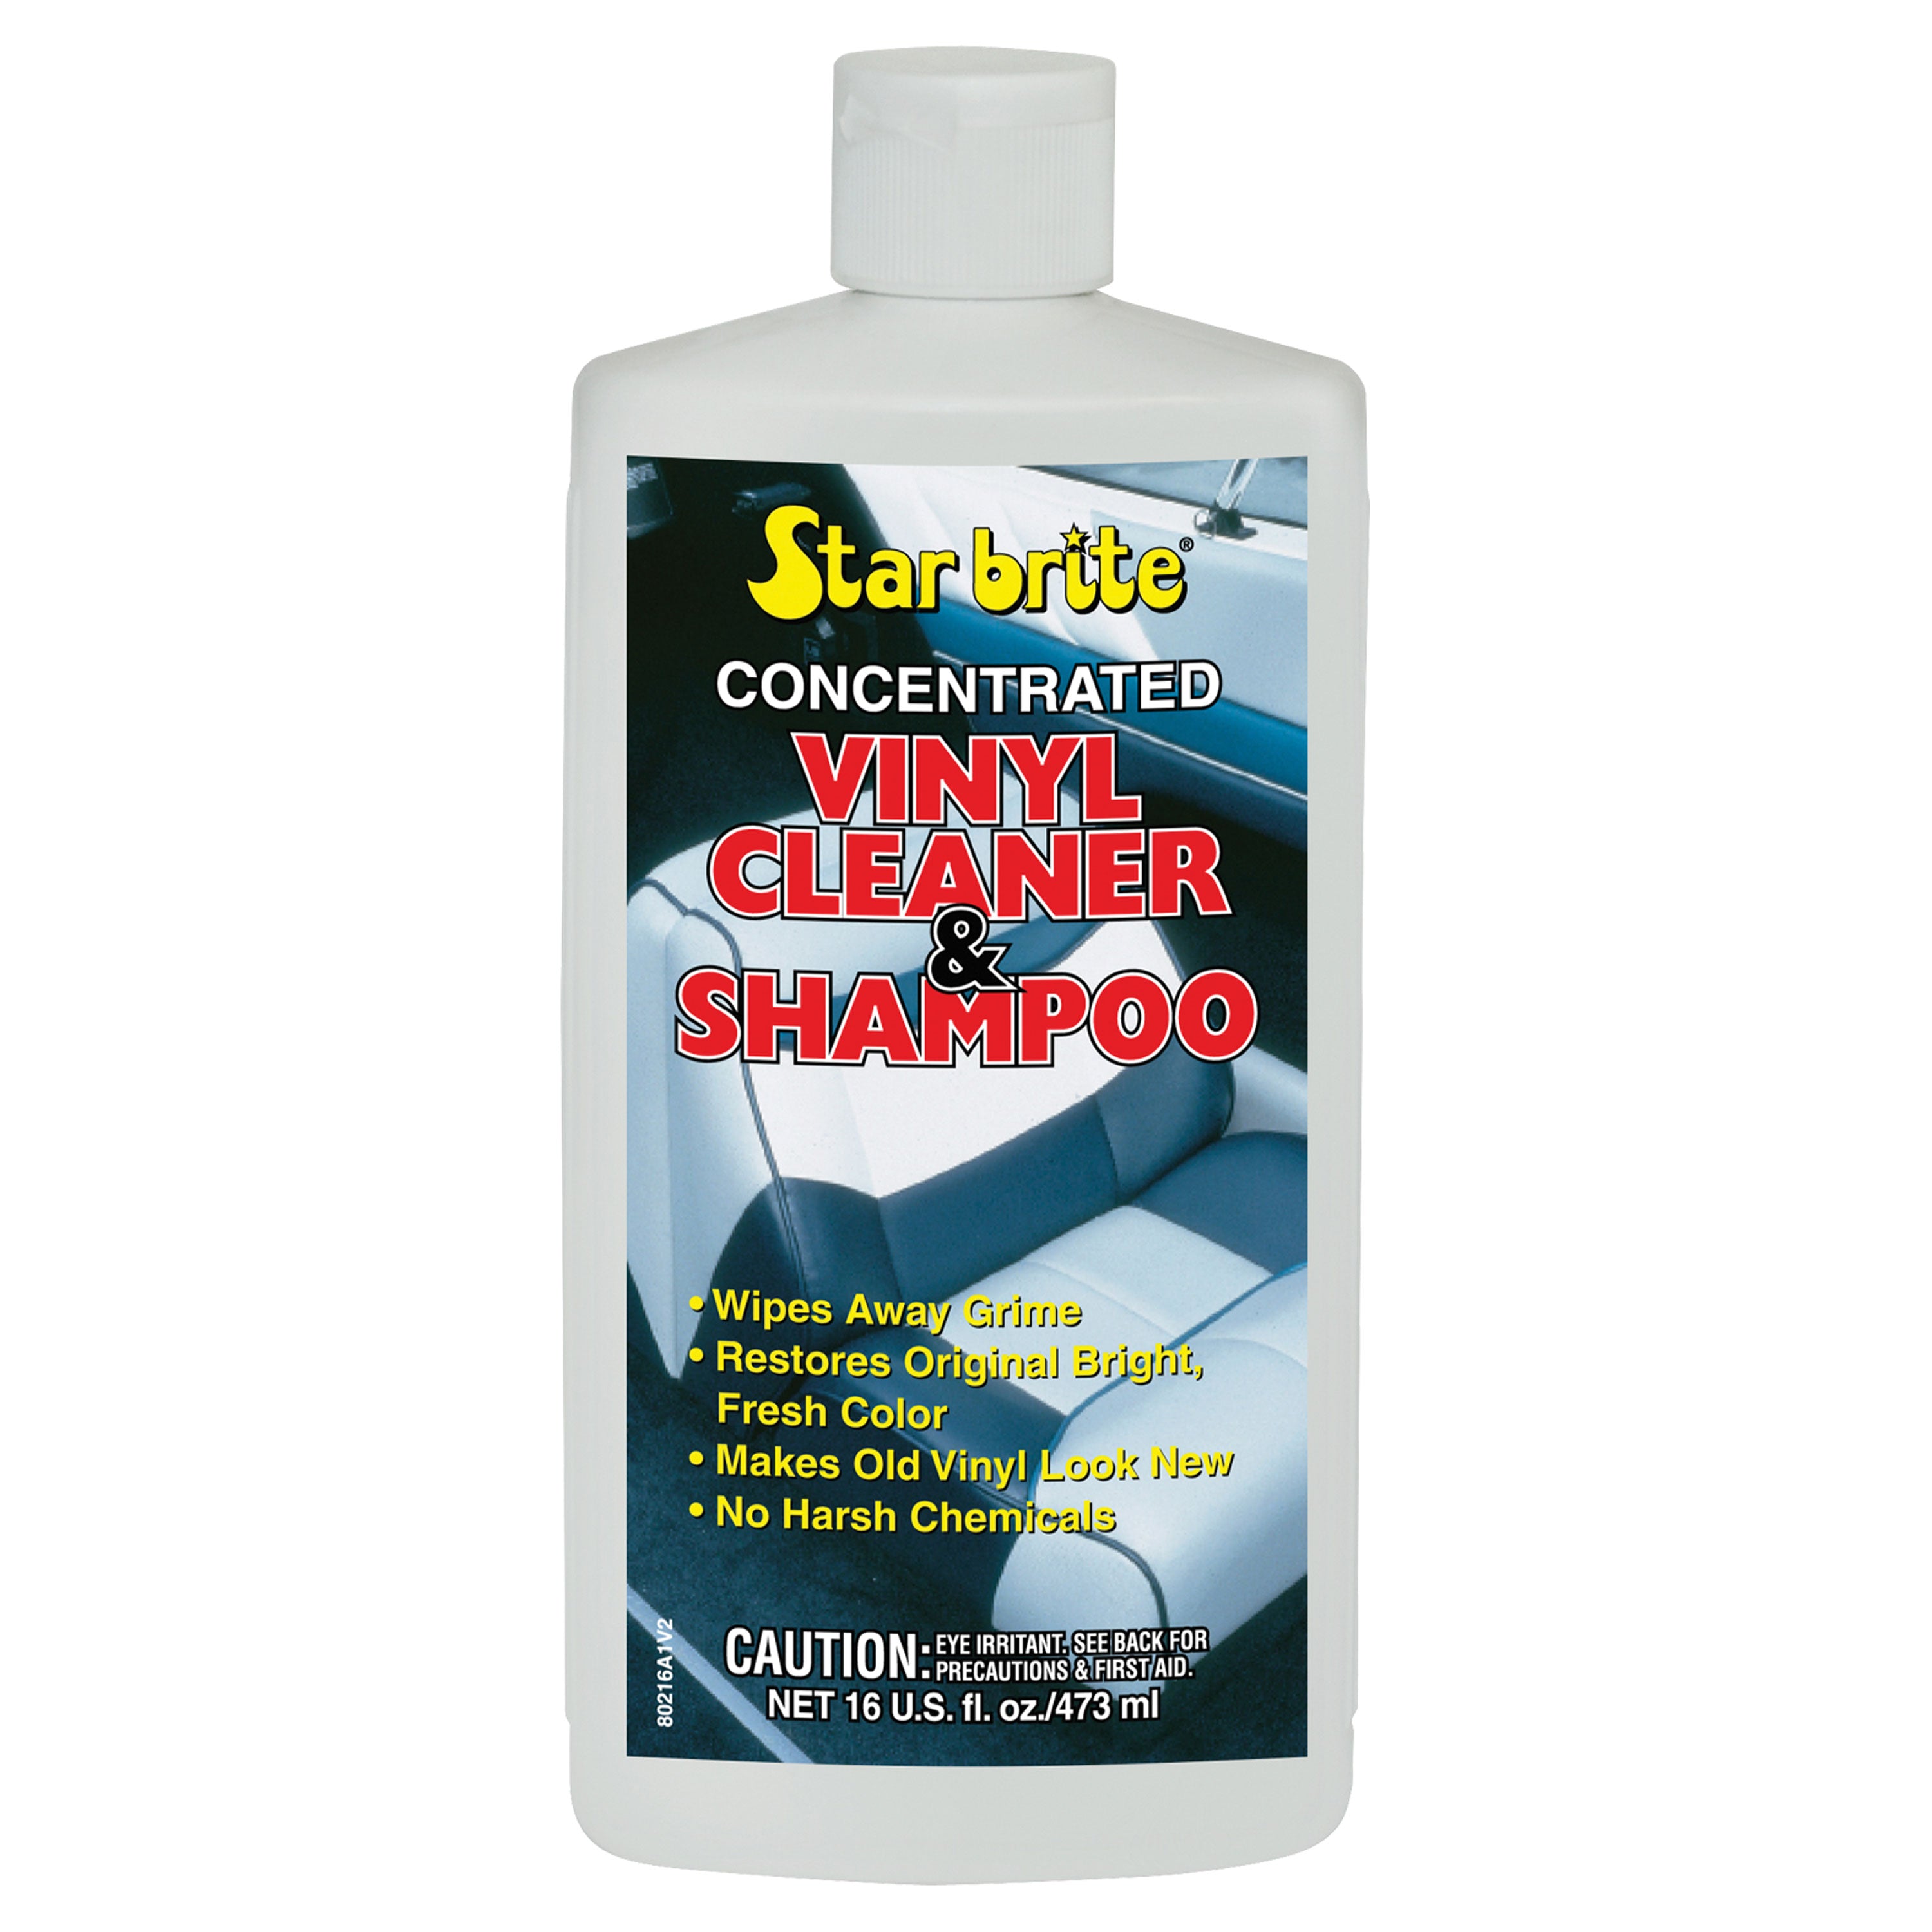 Star brite 080216P Concentrated Vinyl Cleaner and Shampoo - 16 oz